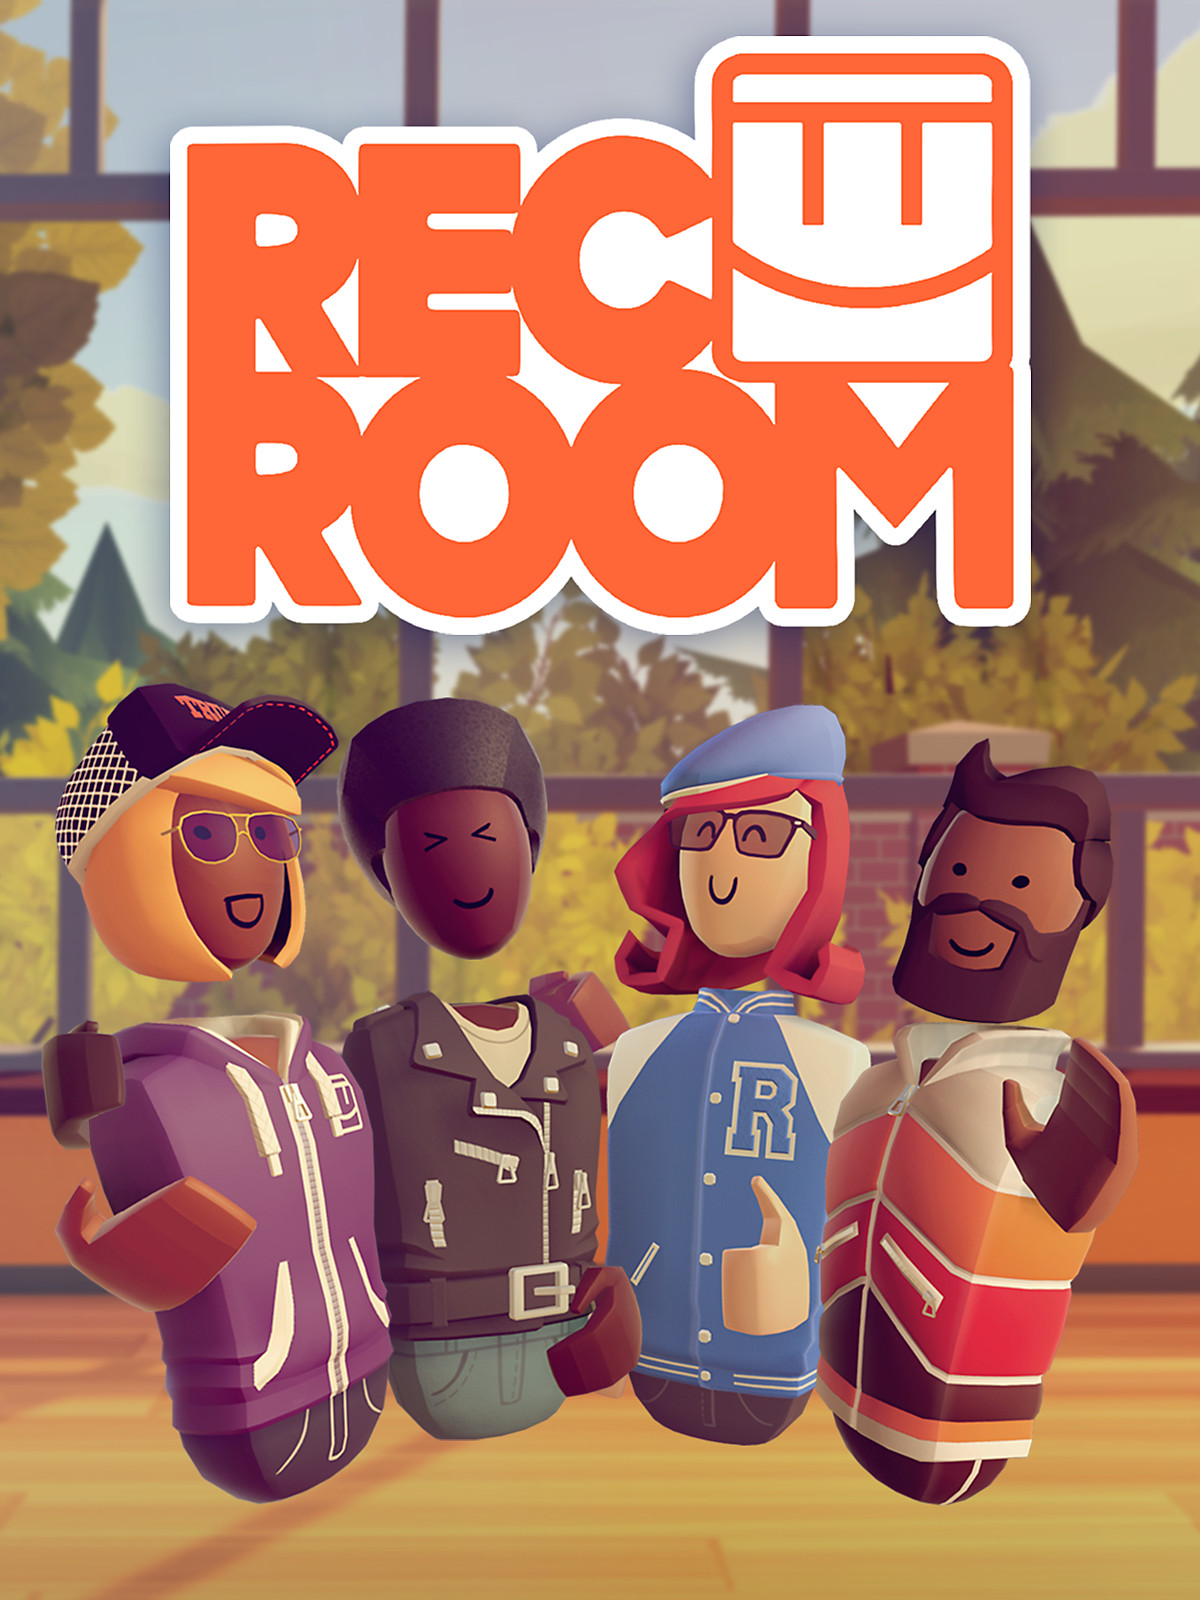 Modern What Are The Best Games In Rec Room for Streamer